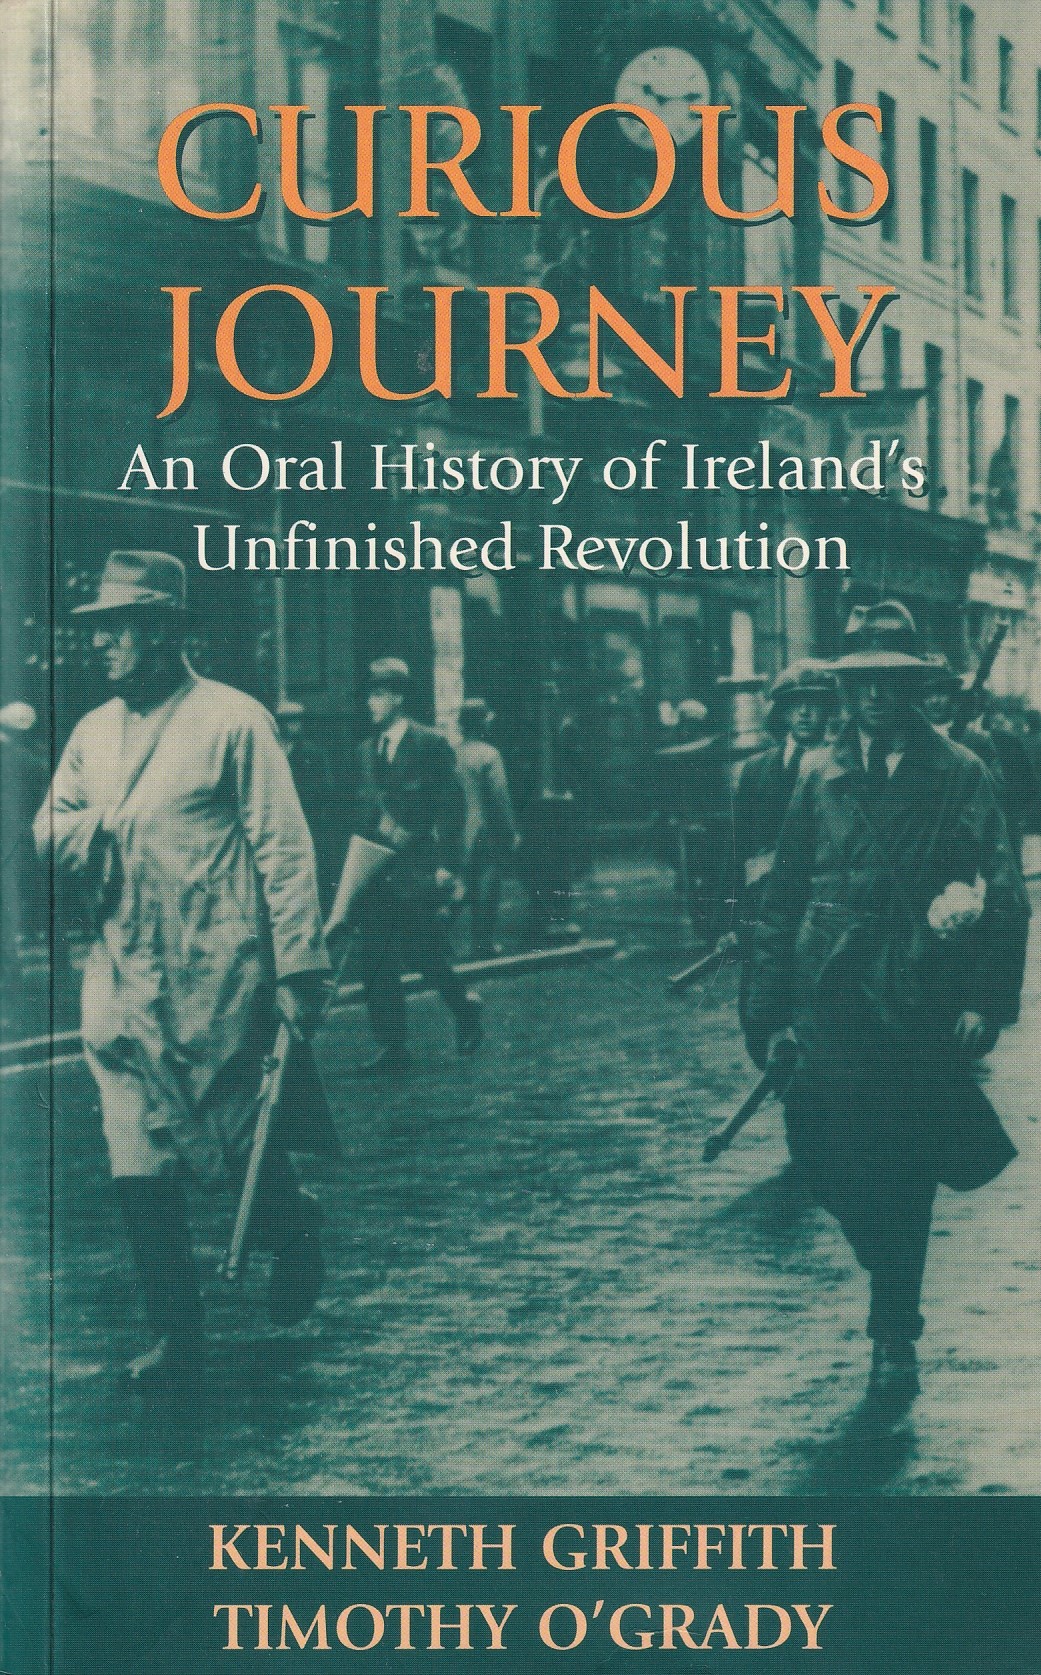 Curious Journey: An Oral History of Ireland’s Unfinished Revolution | Kenneth Griffith & Thomas O'Grady | Charlie Byrne's